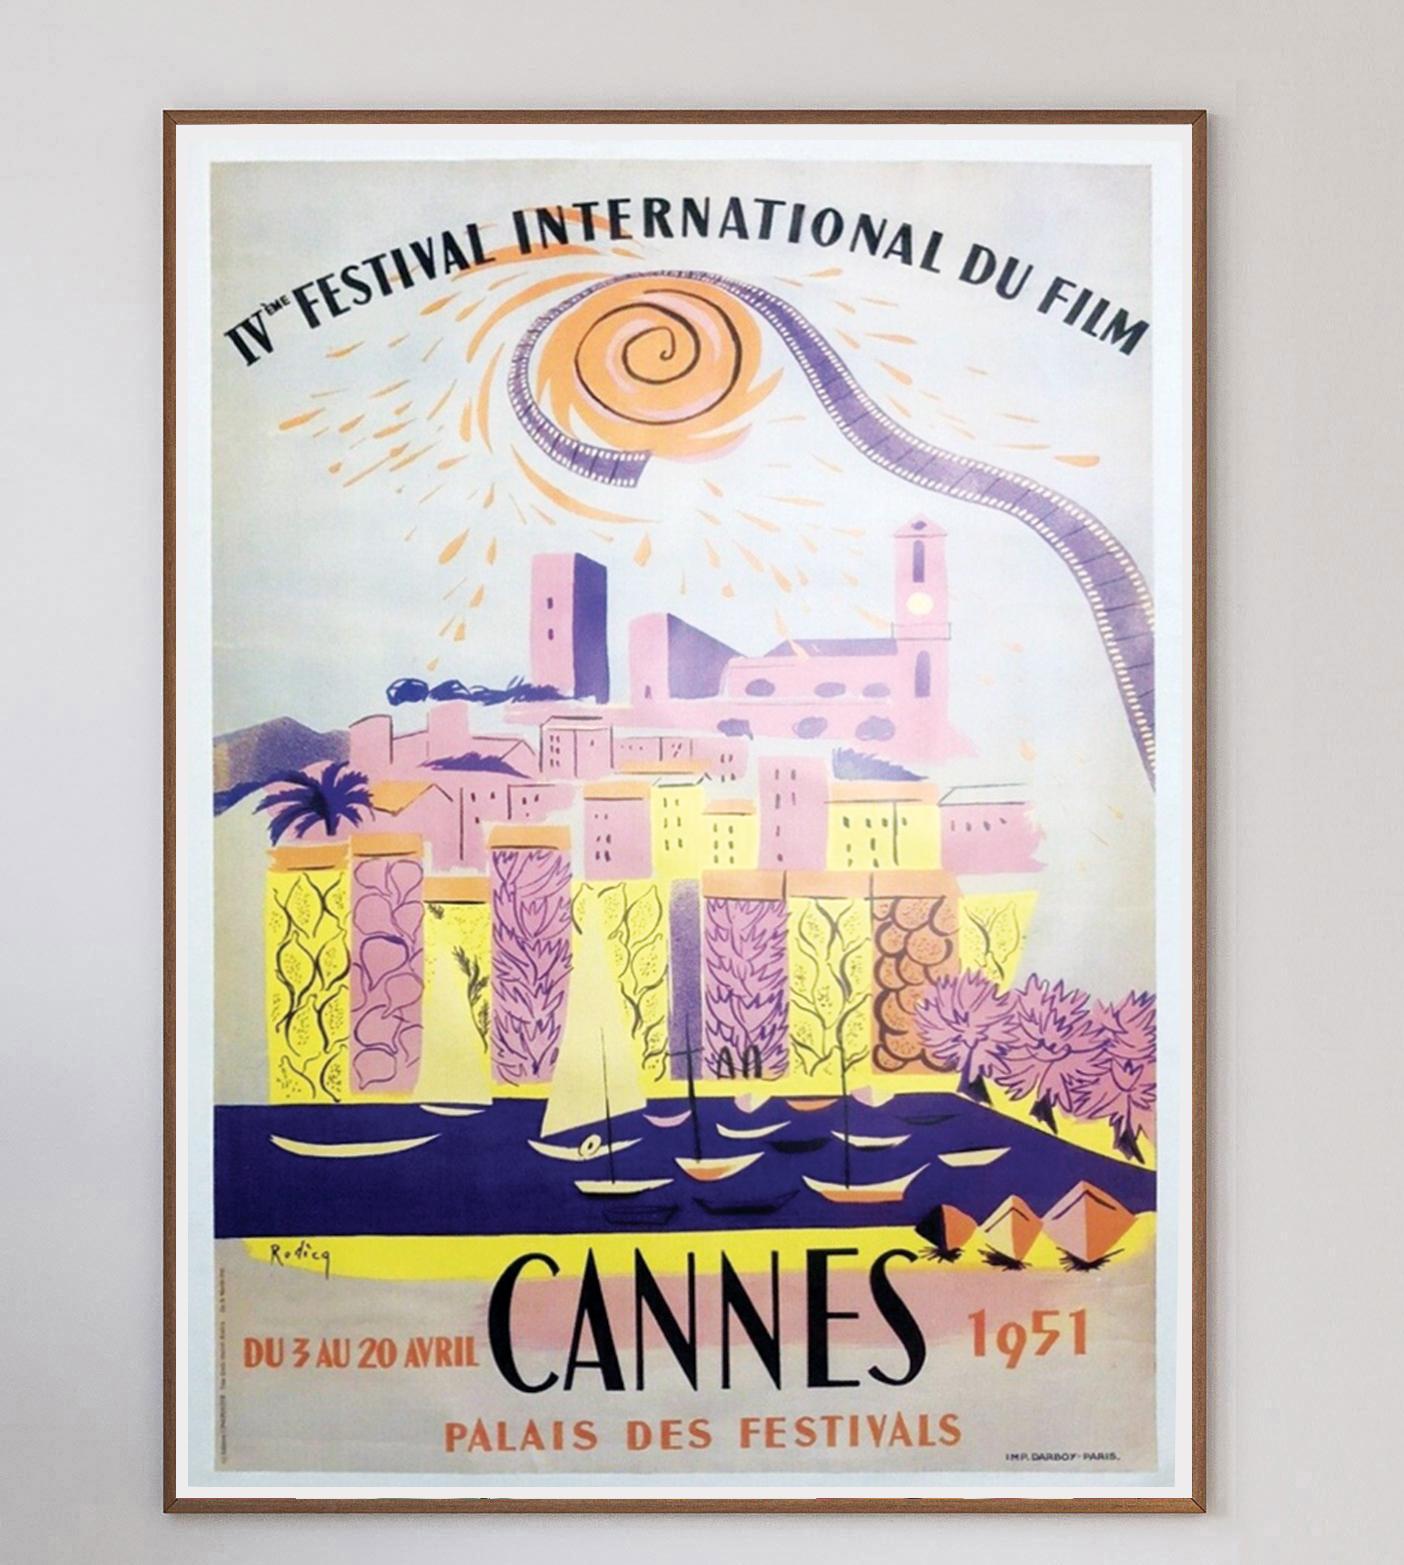 This poster for the 4th Cannes International Fil, Festival in 1951, held from April 3rd to the 20th in Cannes, France. The beautiful design is vibrant in colour with artwork by A.M. Rodicq.

This was the first festival for 2 years, as the previous